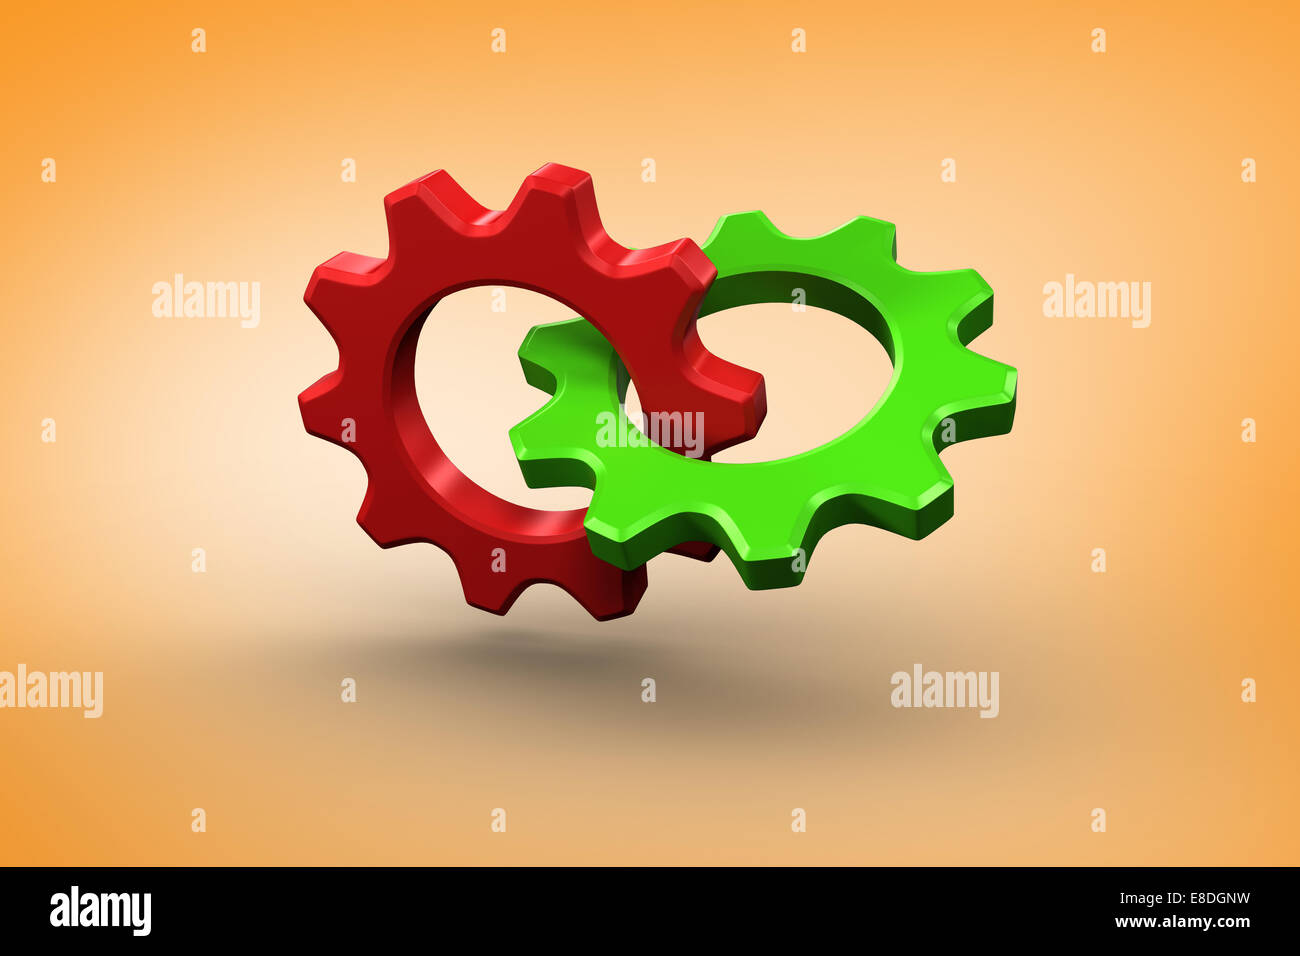 Composite image of green and red cog and wheel Stock Photo